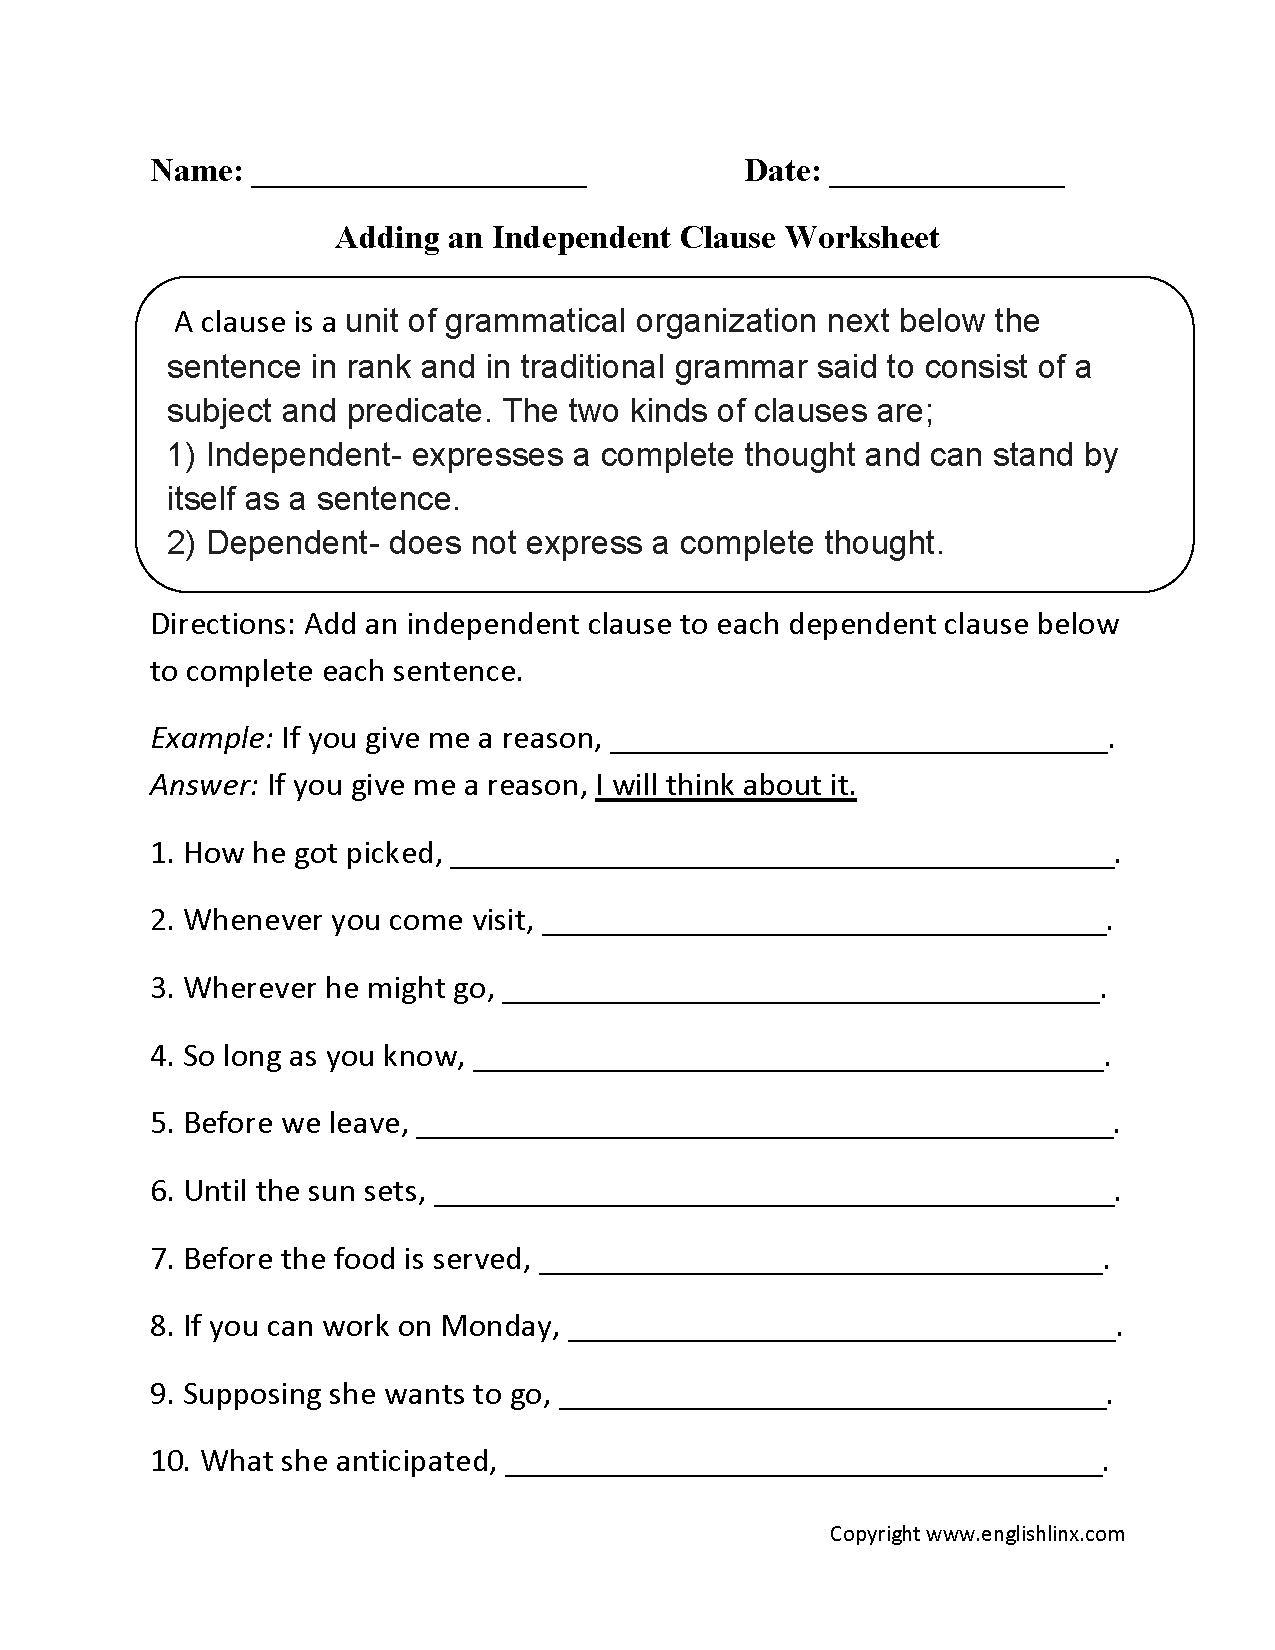 Englishlinx  Clauses Worksheets Intended For Independent And Dependent Clauses Worksheet